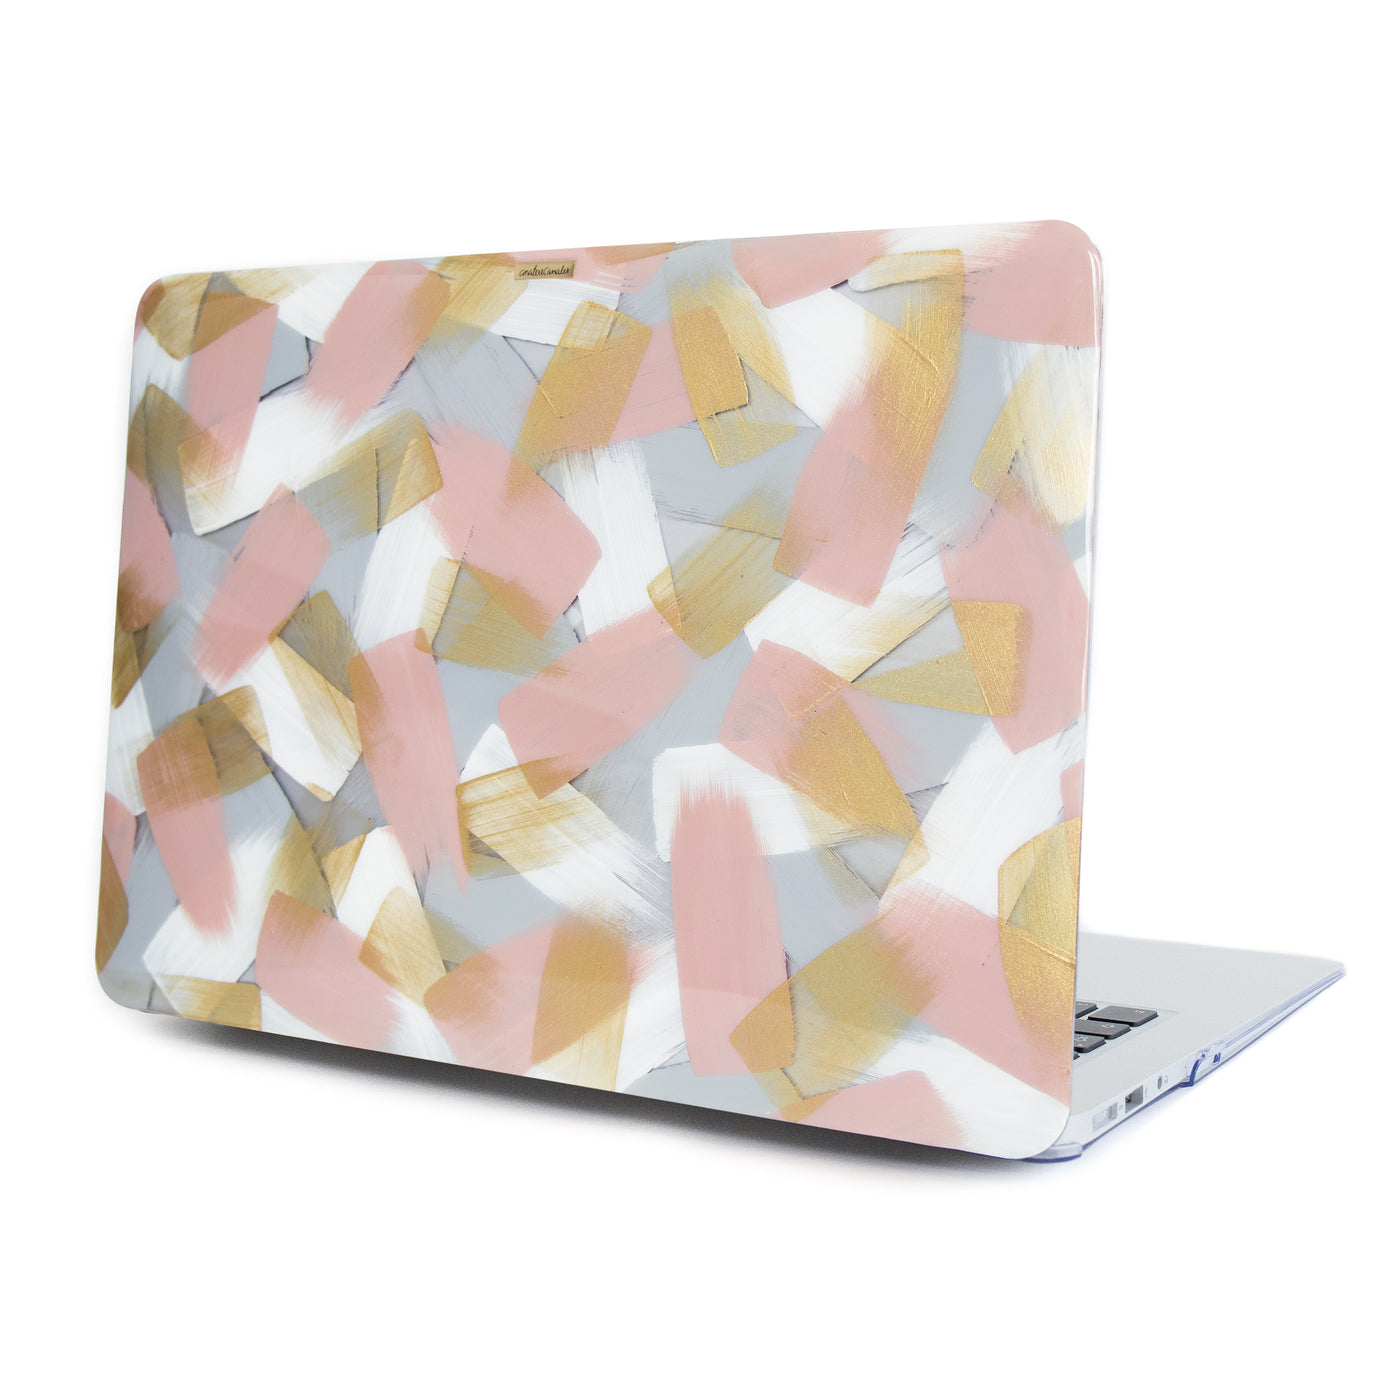 Nude Signature Strokes Macbook - Ana Tere Canales